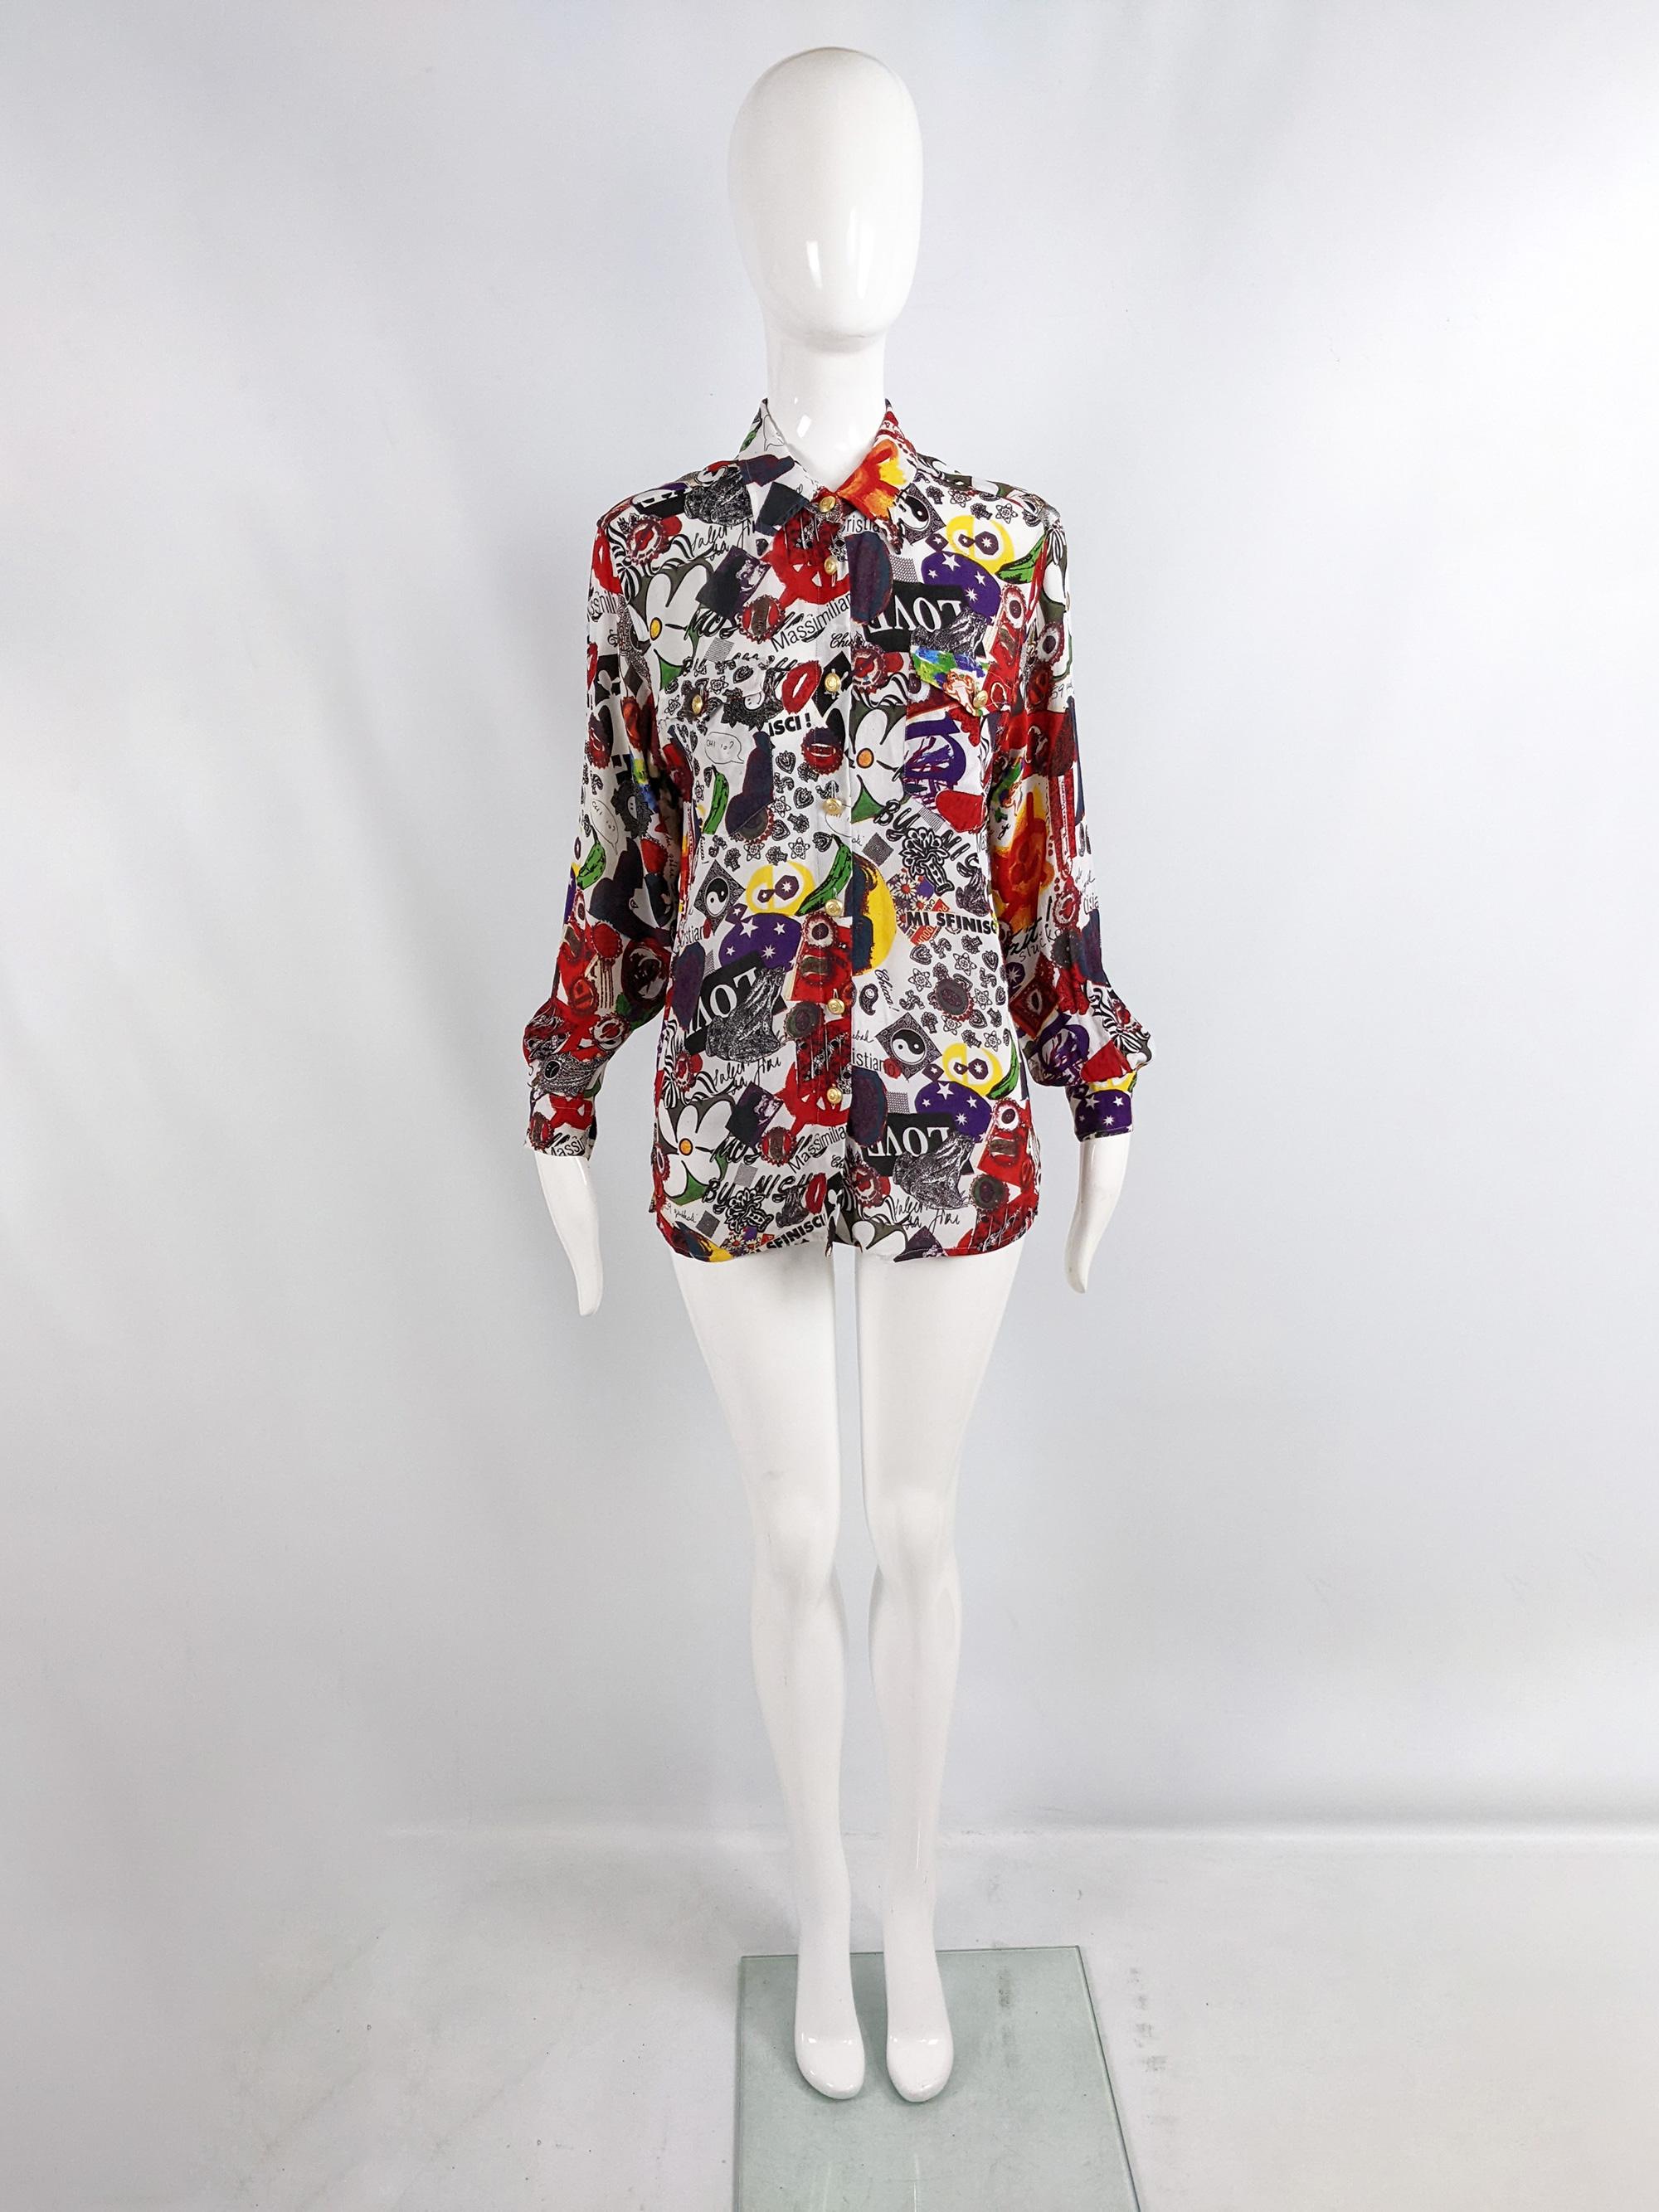 An amazing and rare vintage womens Moschino shirt from the 90s. Made in Italy, from a white crepe with an insane, vibrant print throughout featuring pretty much all of Franco Moschino's signature symbols (cows, happy faces, Olive Oyl, peace signs